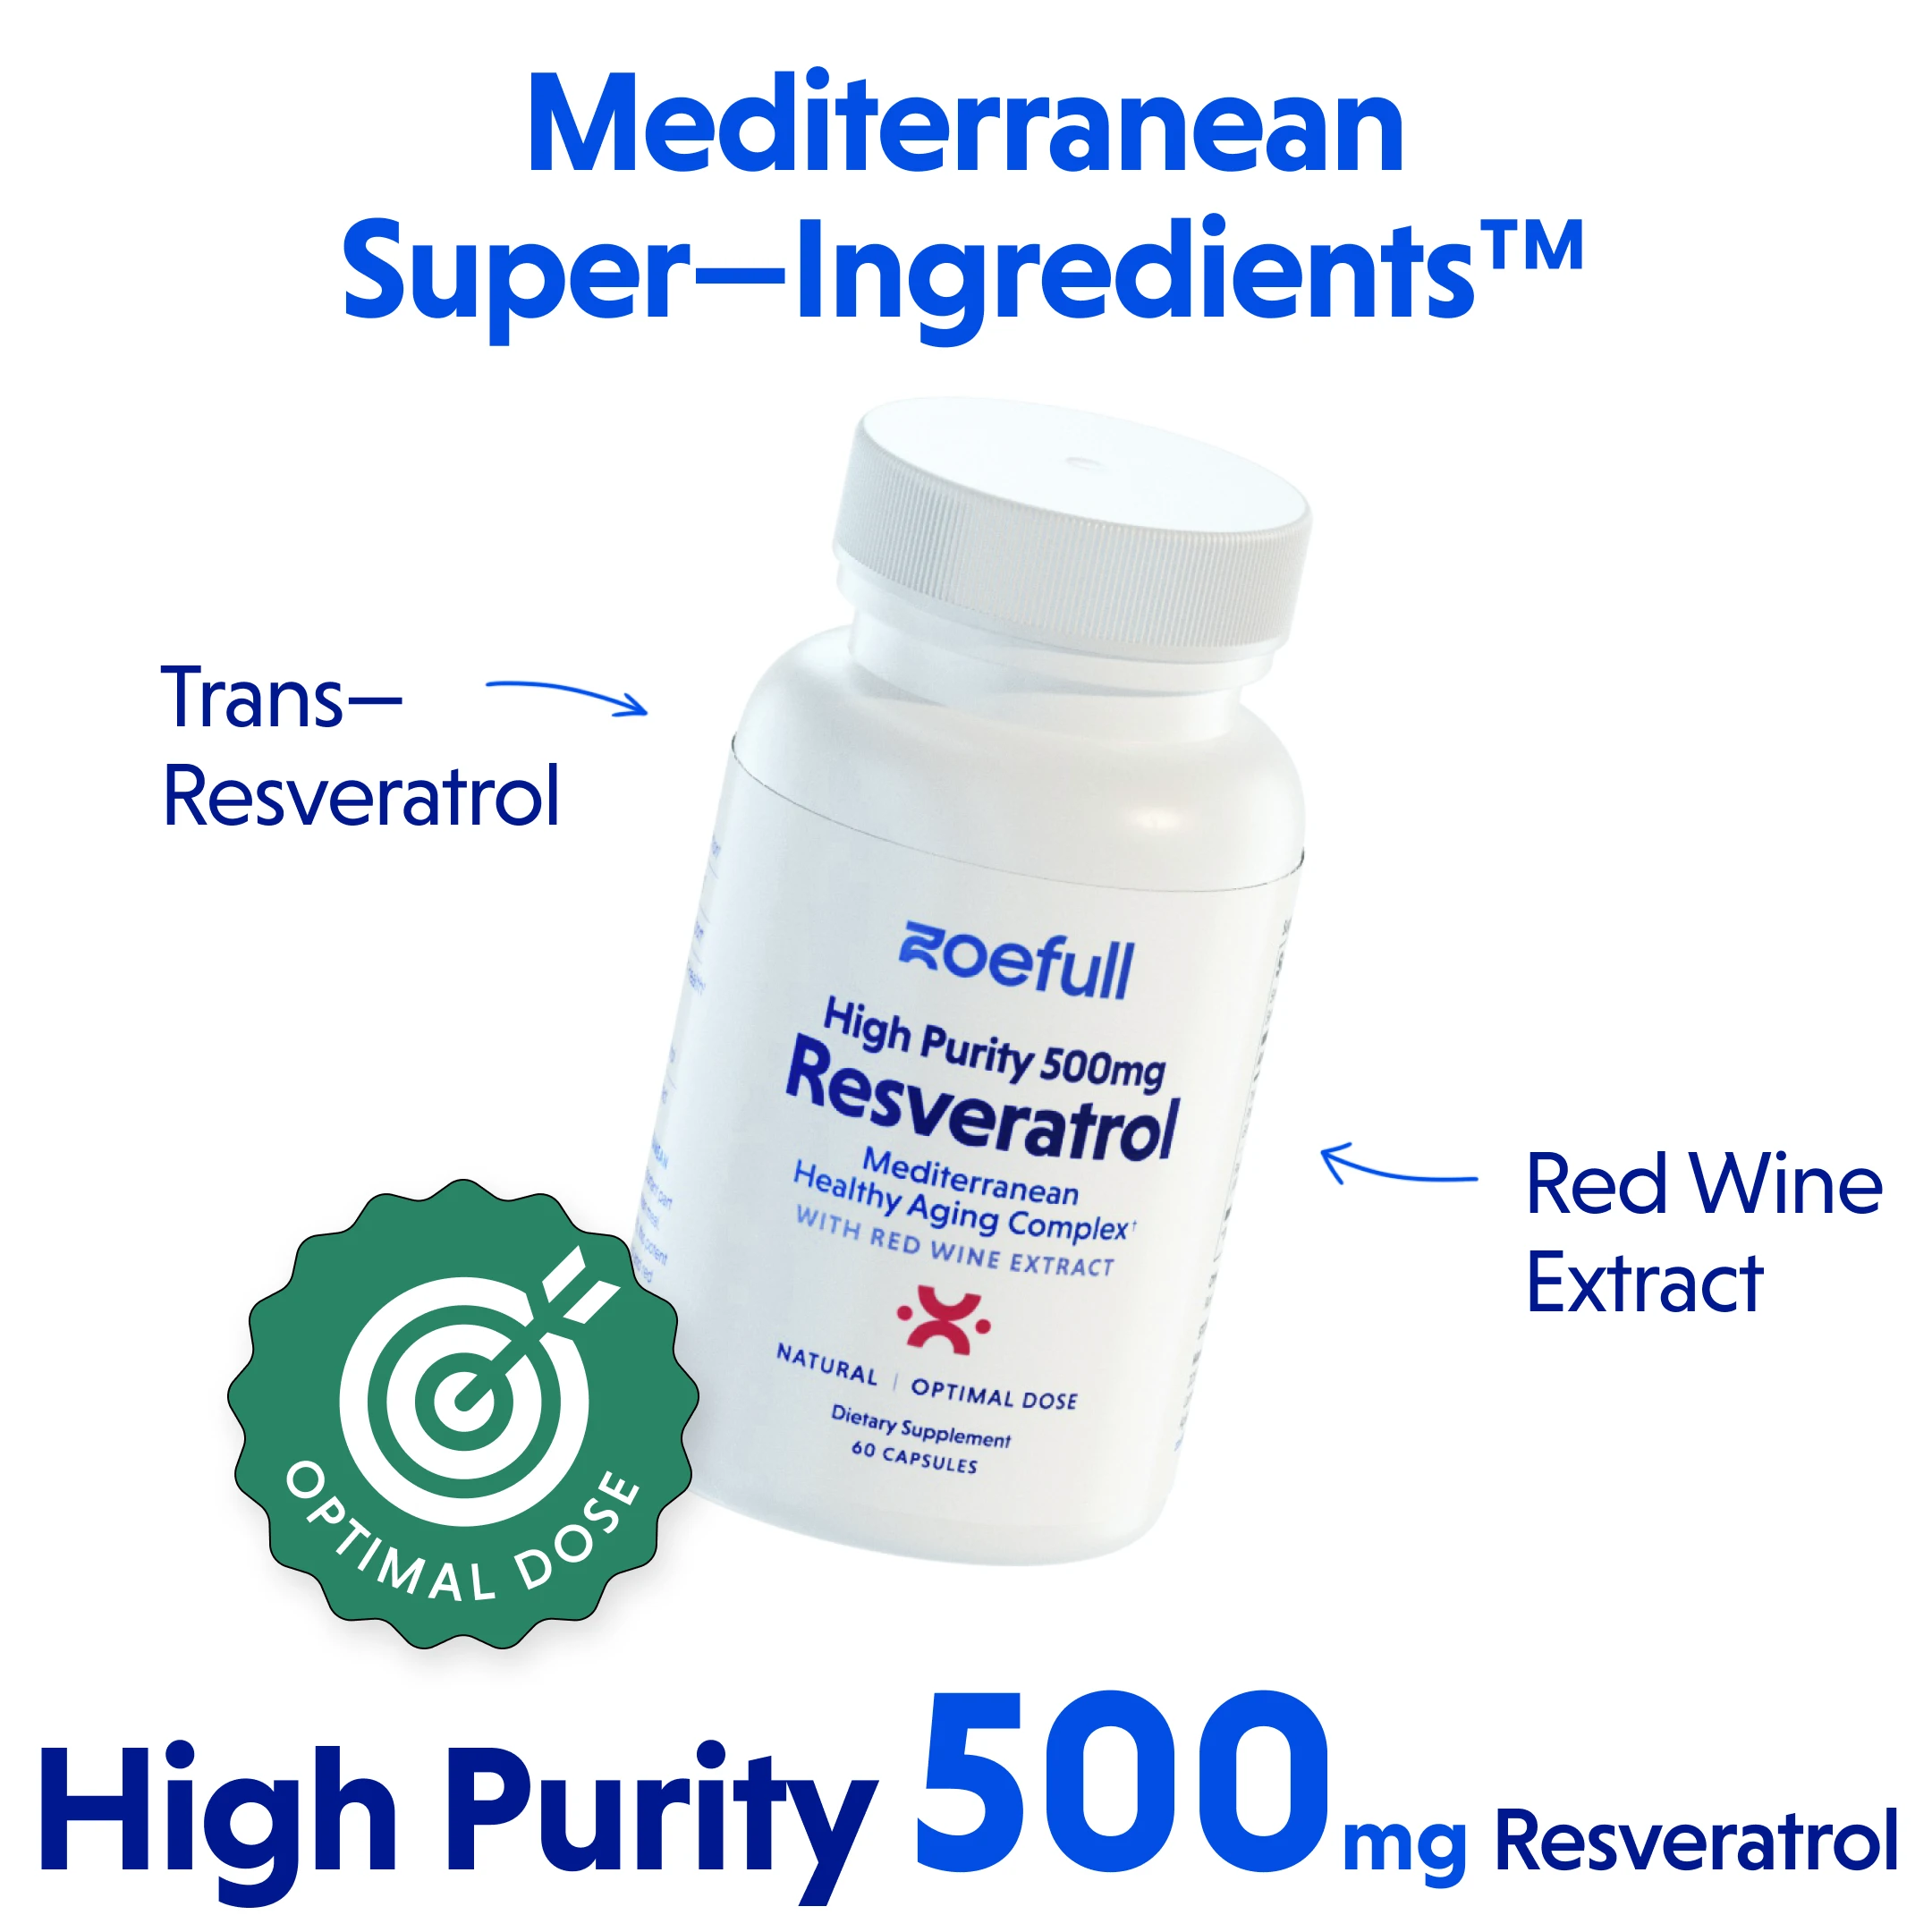 Design that showcases zoefull's resveratrol supplement  made of these mediterranean super ingredients: trans-resveratrol and red wine extract. It says that it contains the optimal dose of 500mg of highly pure resveratrol.